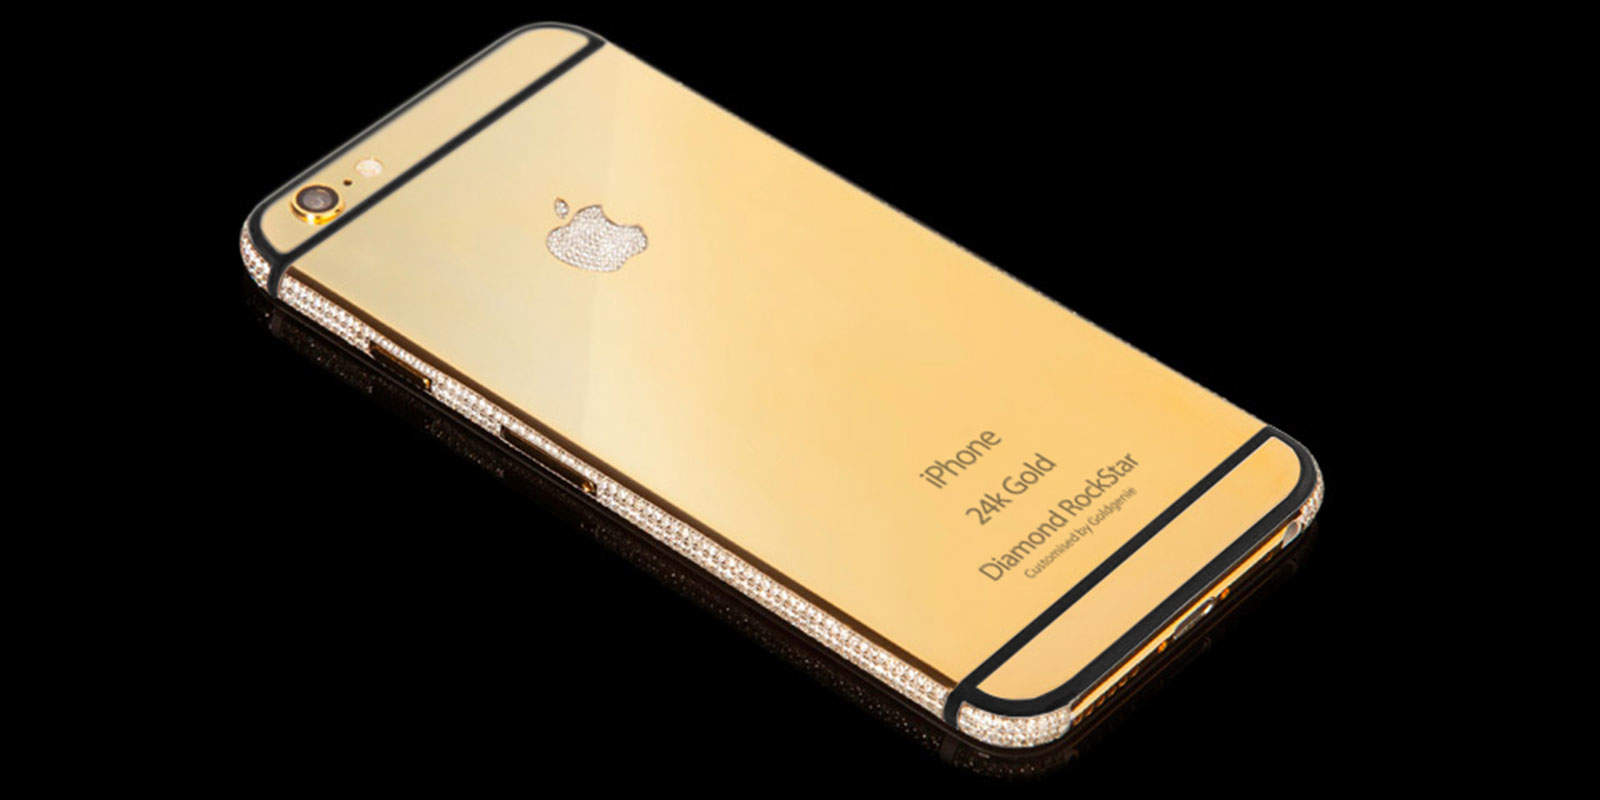 Goldgenie offers the iPhone 6s with a couple of additional upgrades, diamonds and gold.